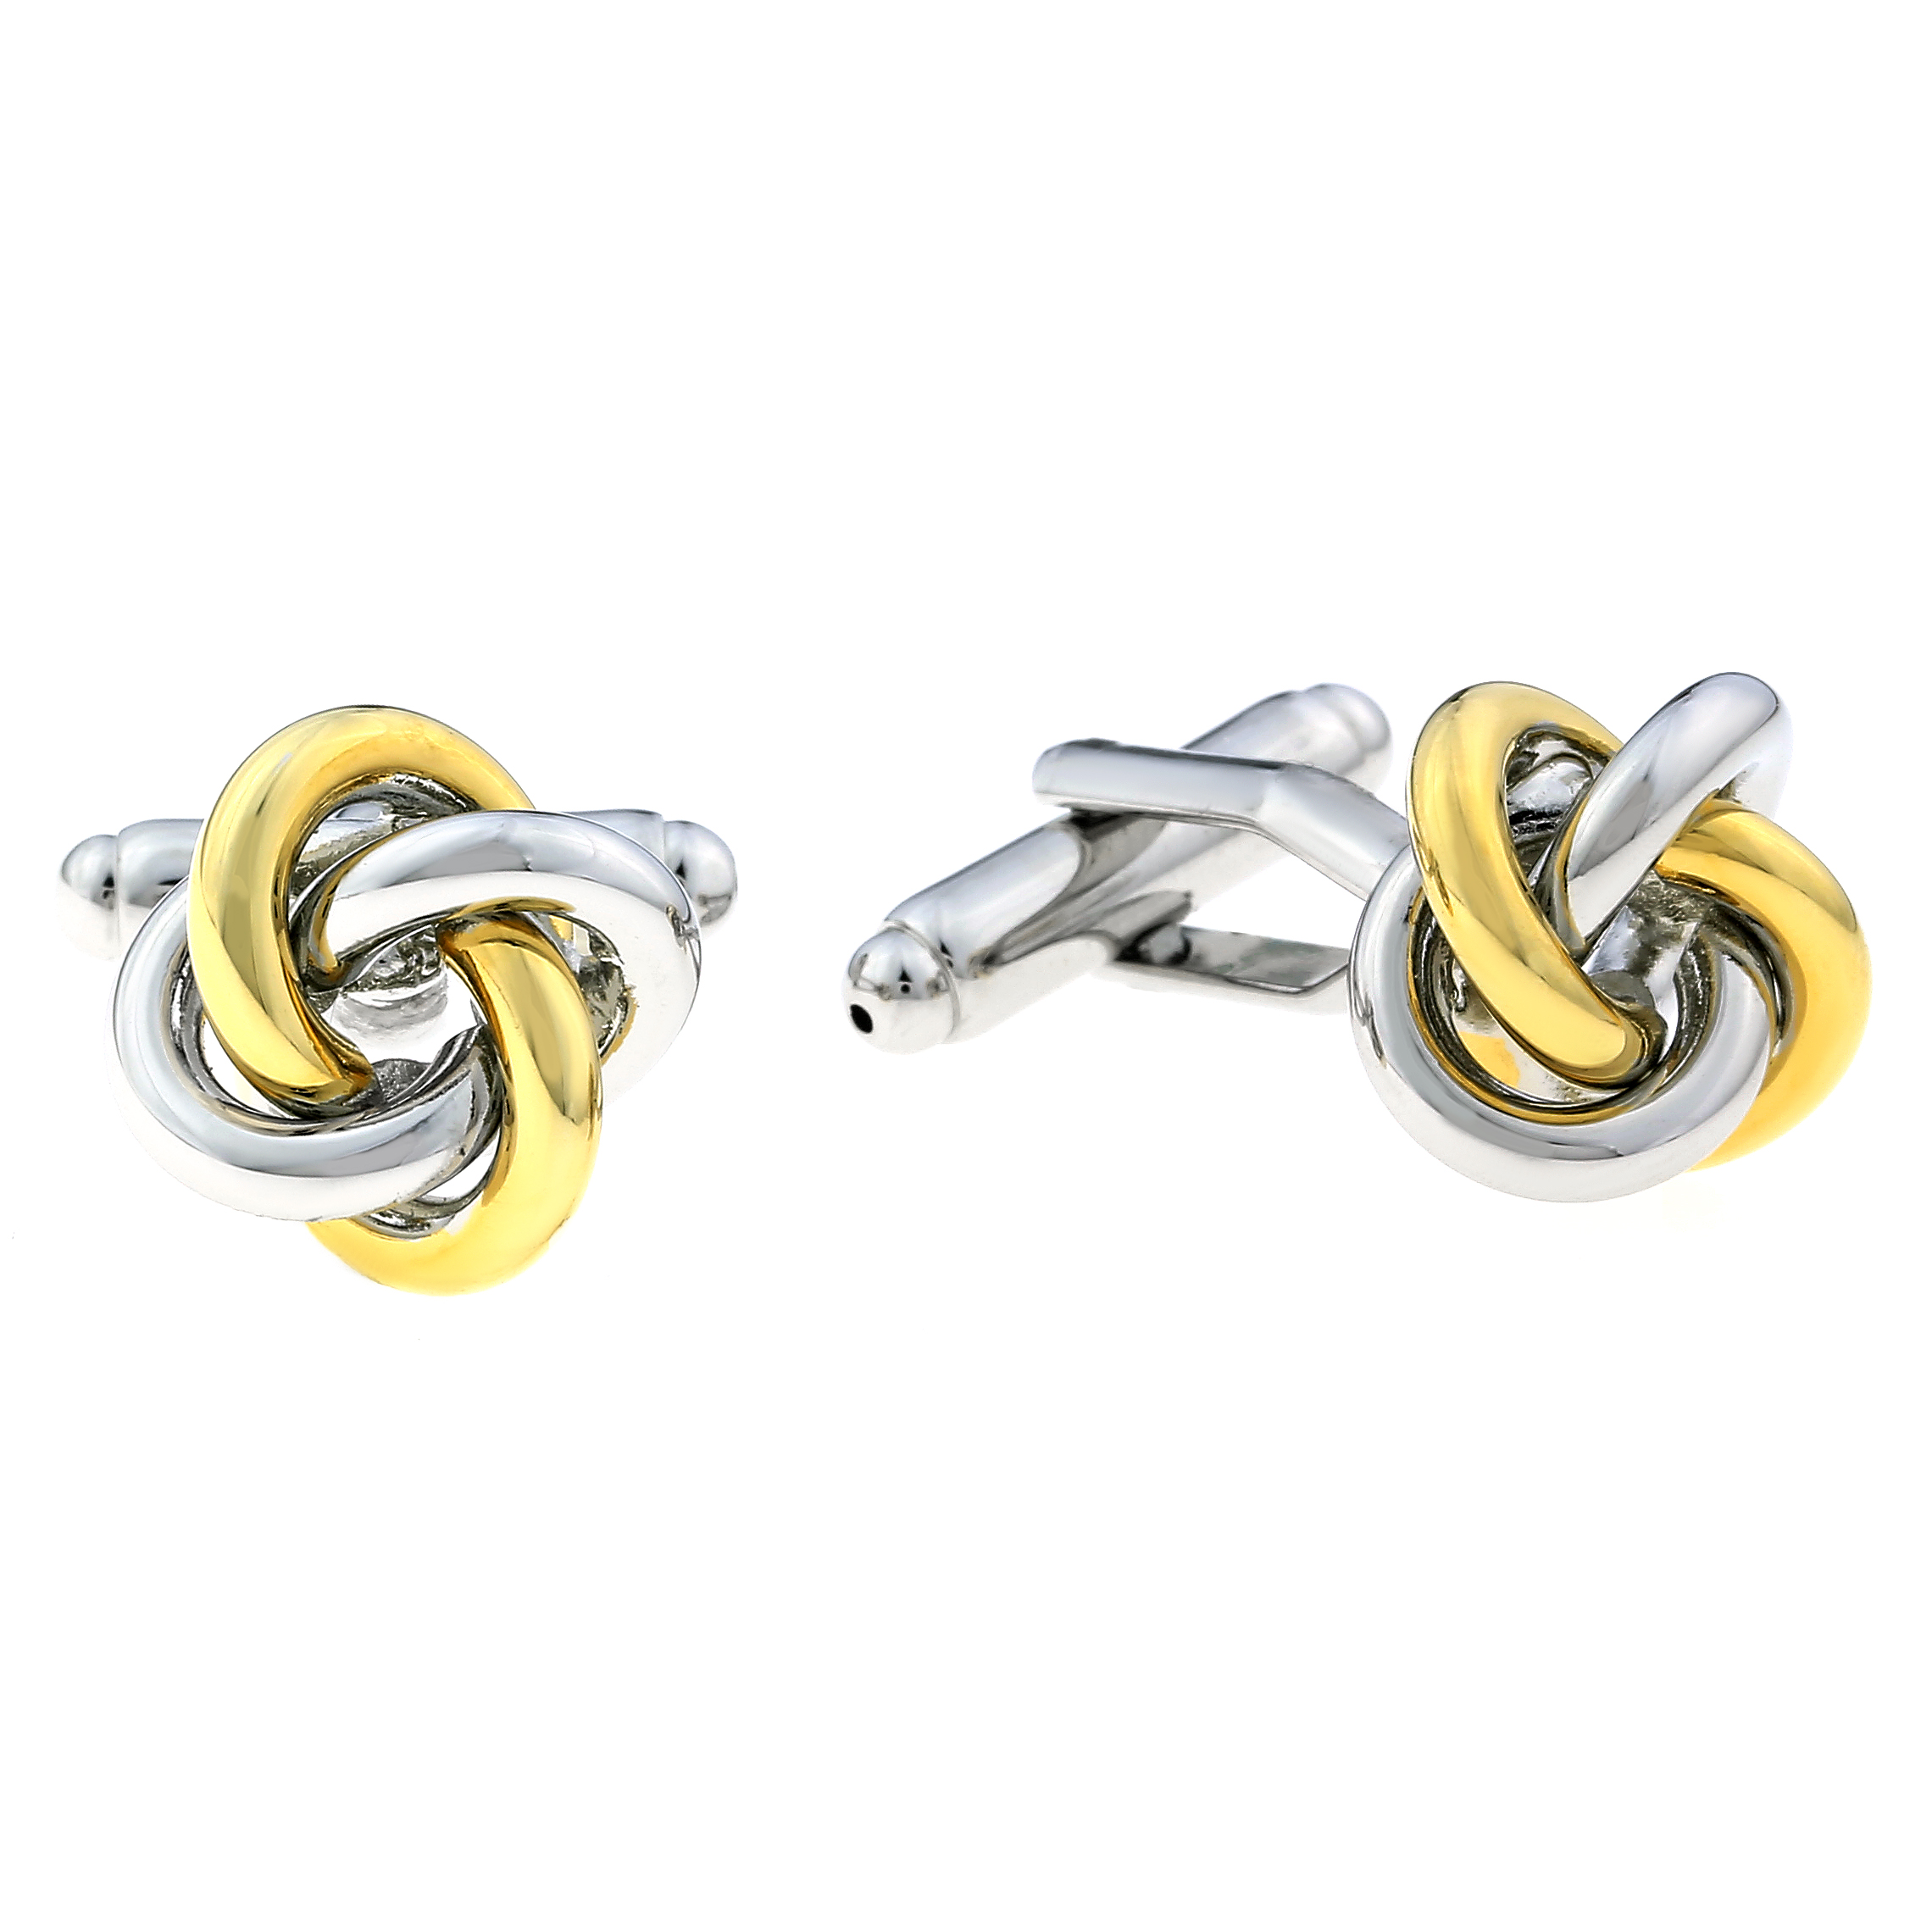 Stainless Steel Knot Design Cuff Links with Gold IP Accent